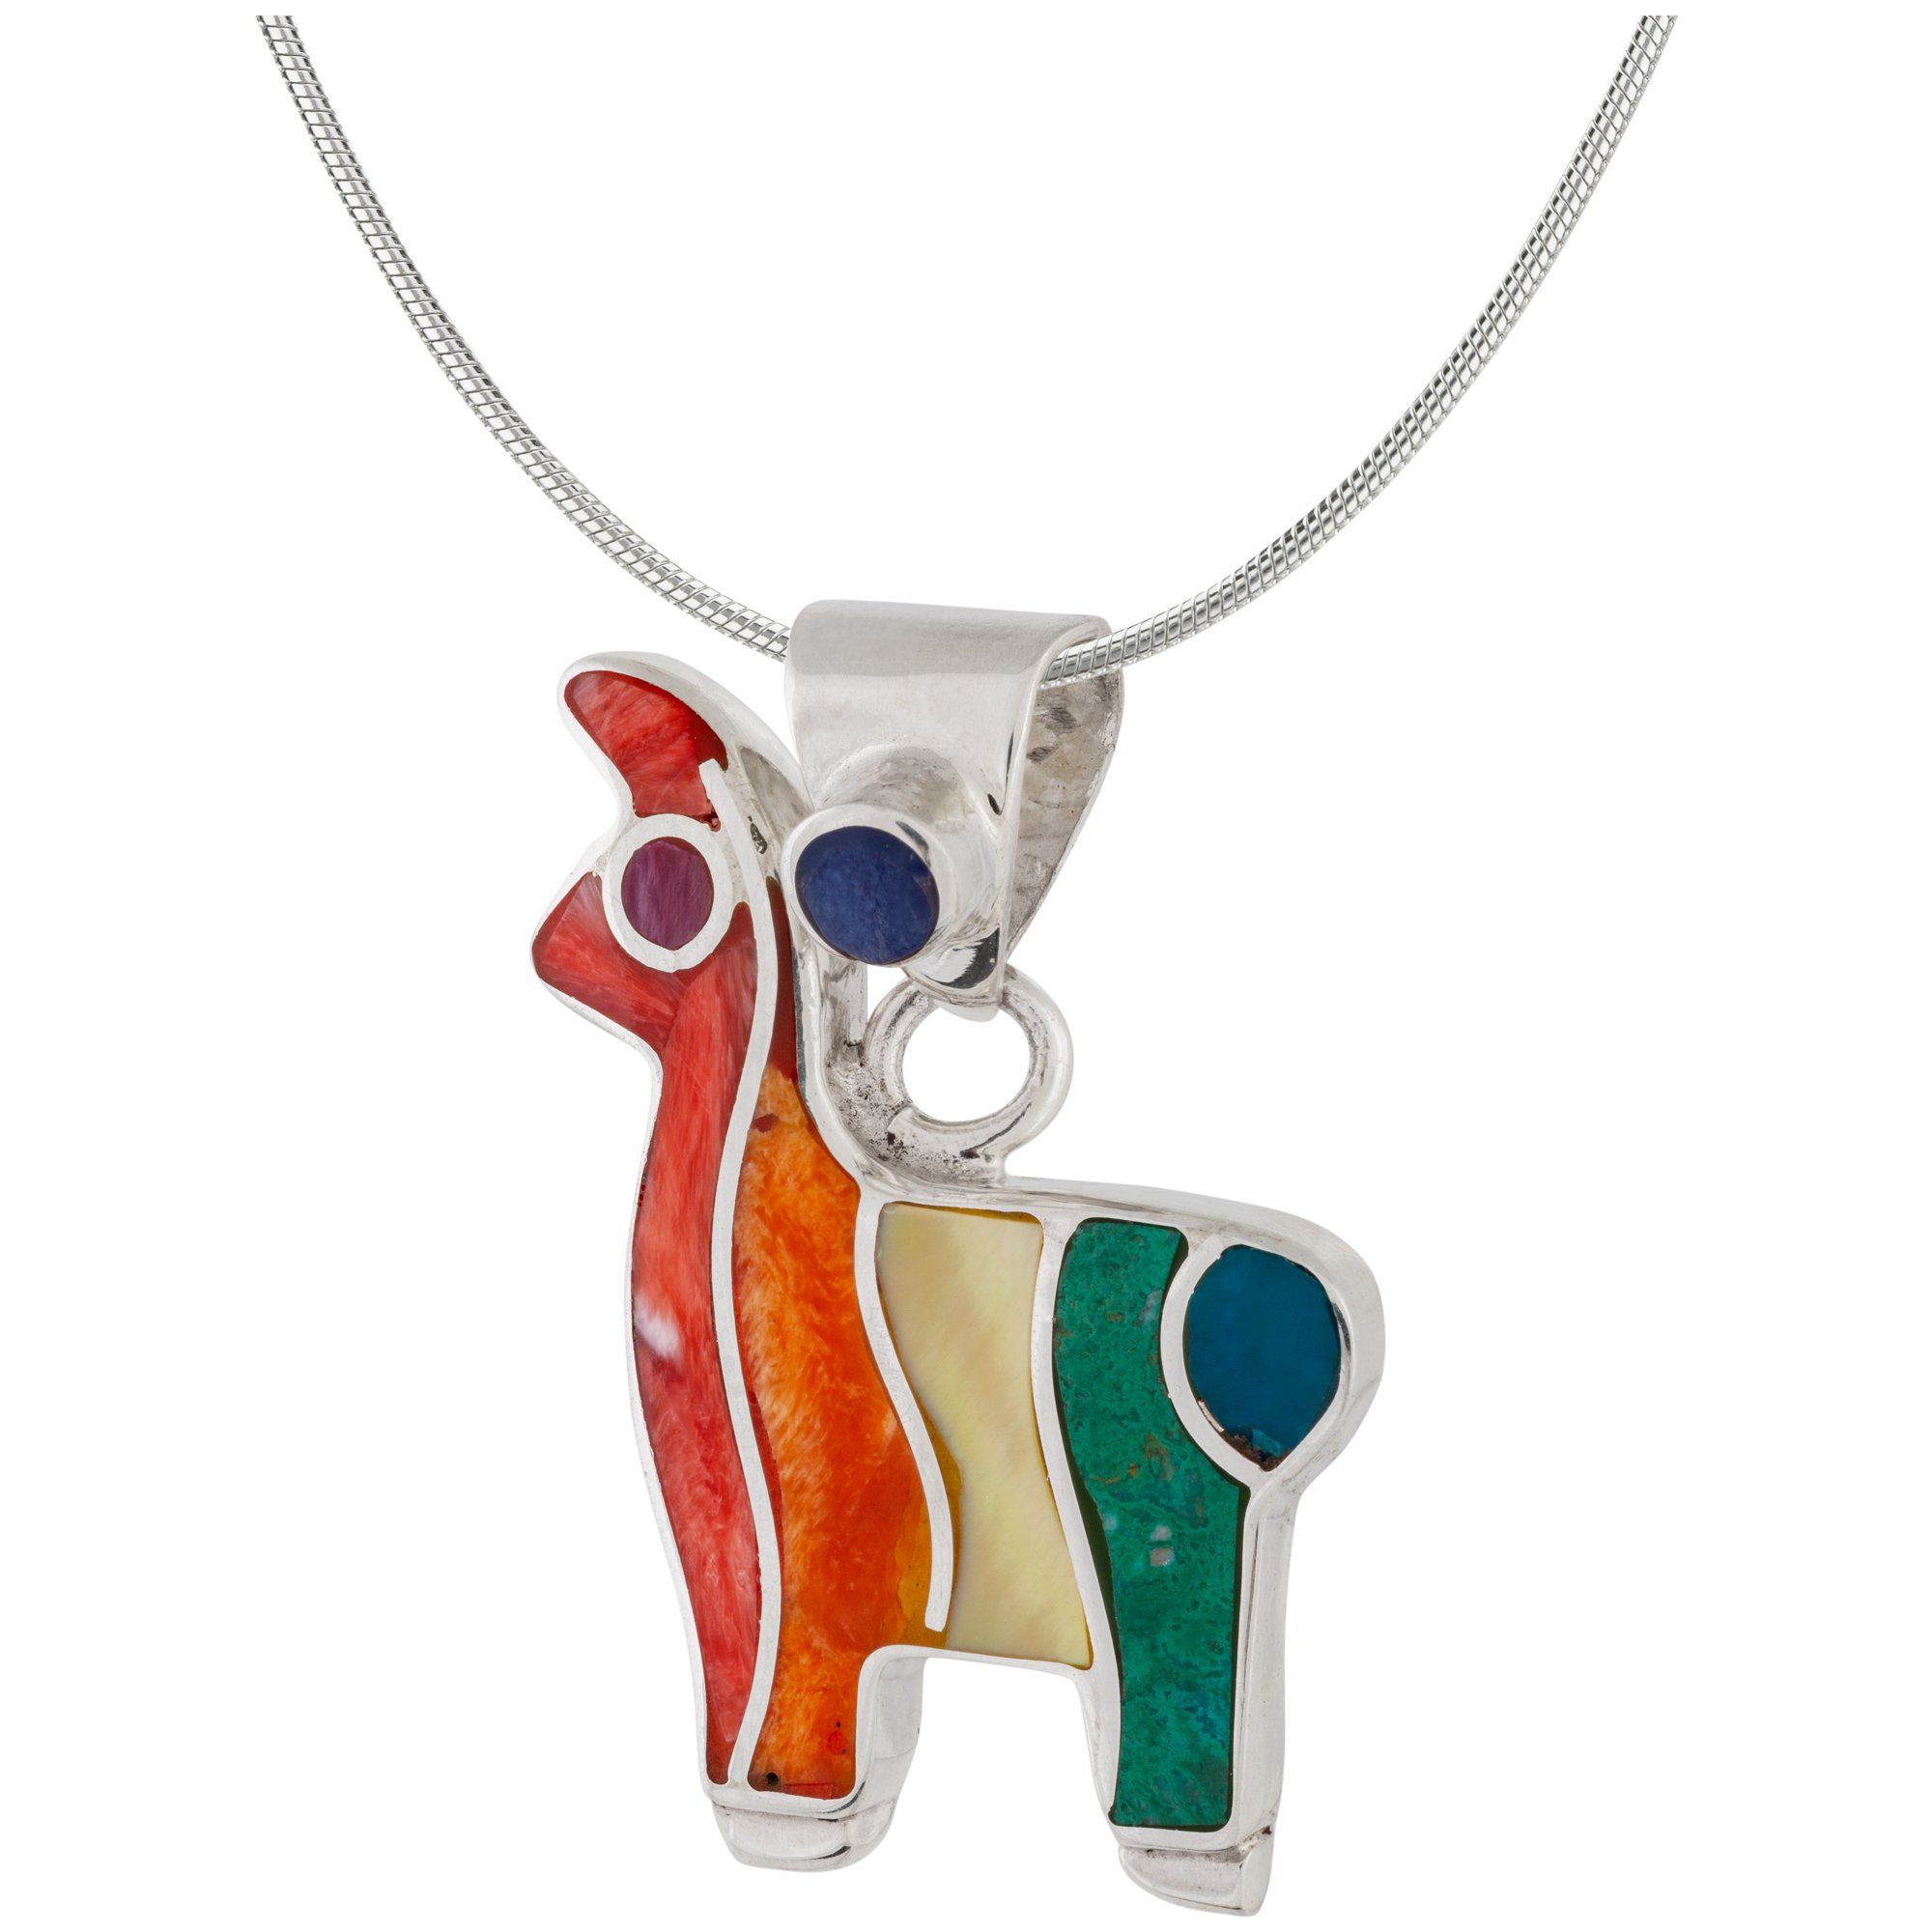 Earth's Splendor Gemstone & Sterling Necklace - Llama - With Snake Chain